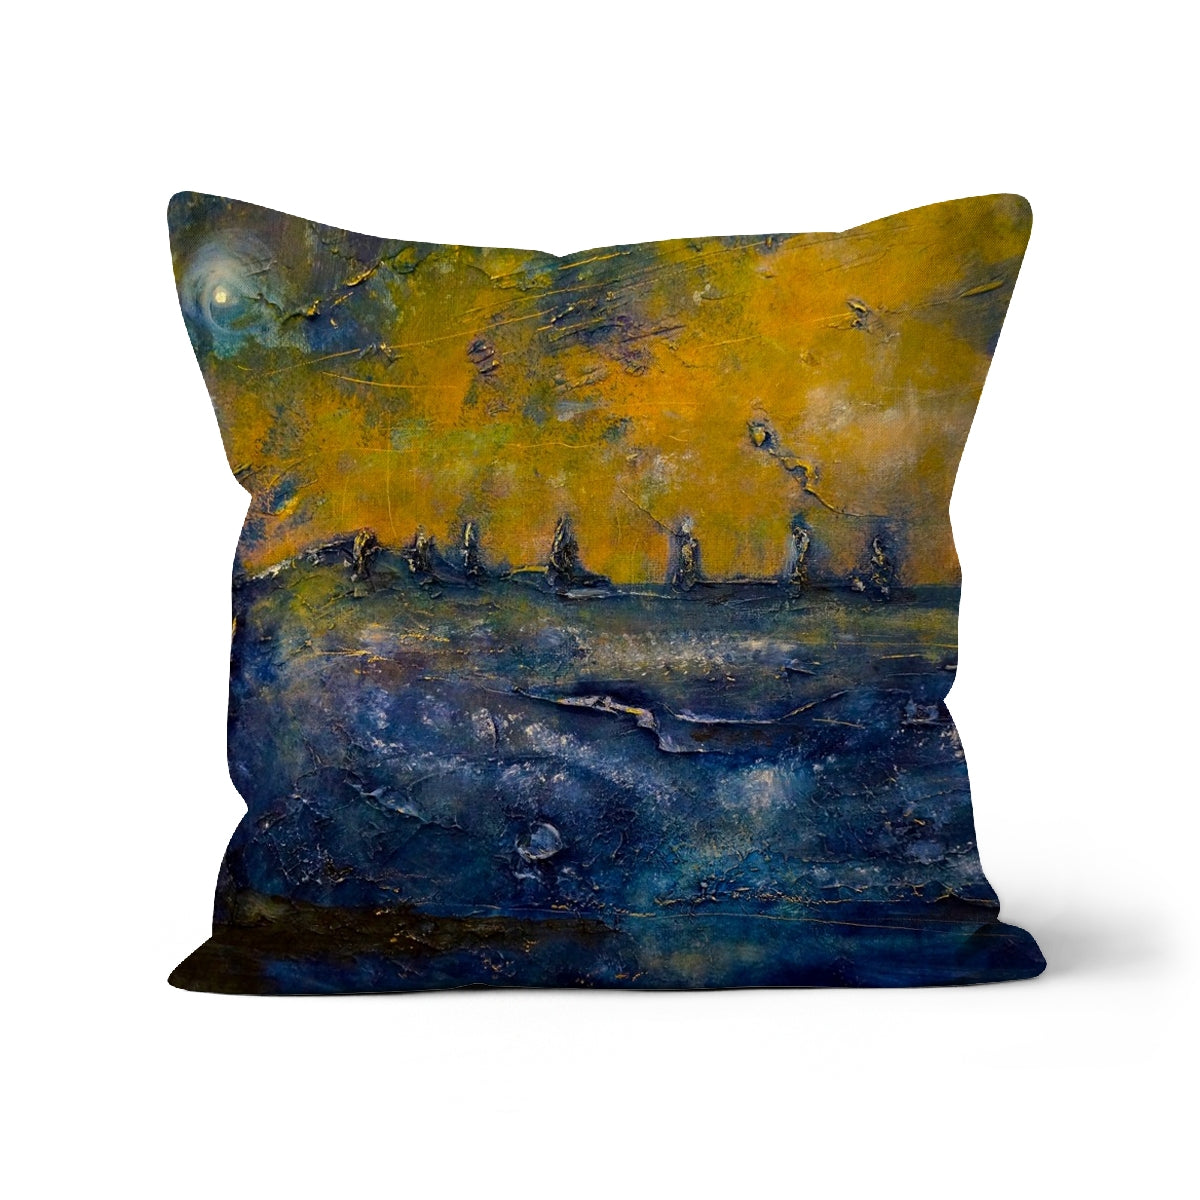 Brodgar Moonlight Orkney Art Gifts Cushion-Cushions-Orkney Art Gallery-Linen-12"x12"-Paintings, Prints, Homeware, Art Gifts From Scotland By Scottish Artist Kevin Hunter